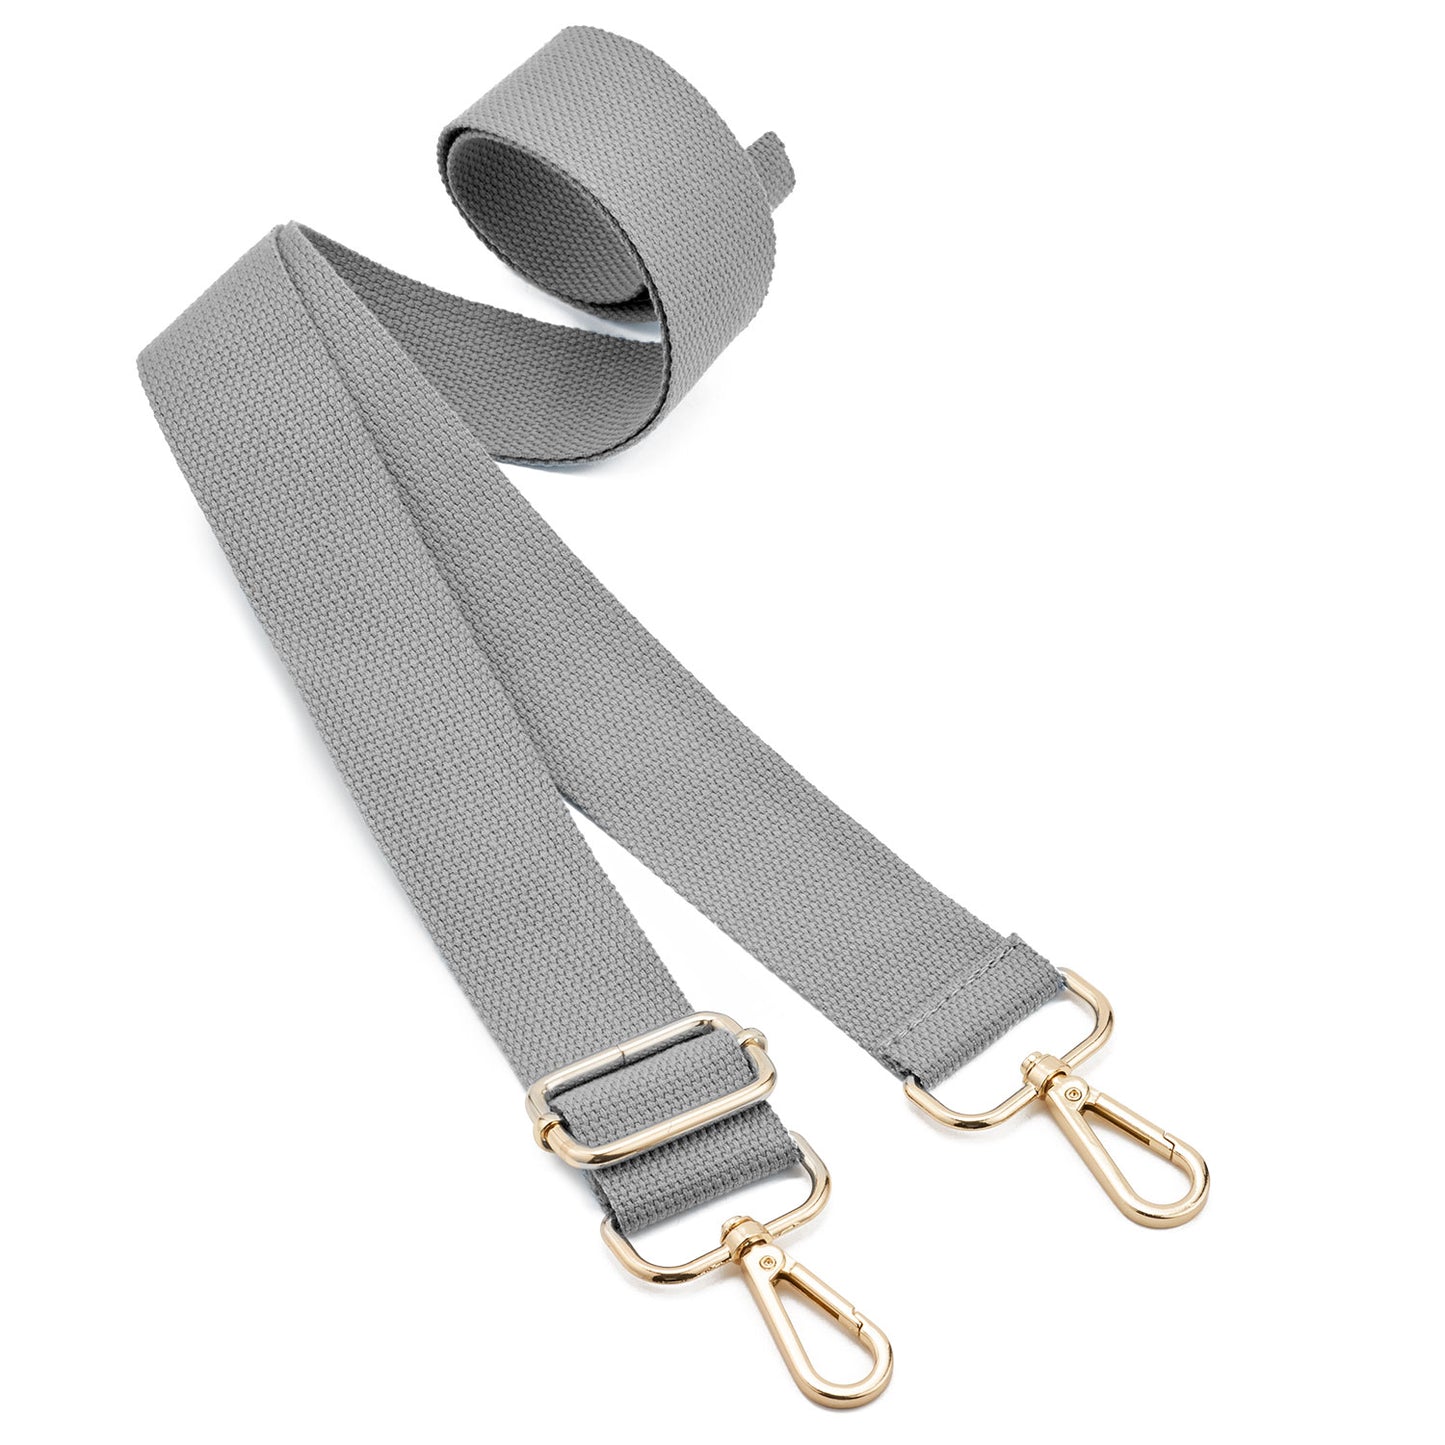 China Factory Wide Polyester Purse Straps, Replacement Adjustable Shoulder  Straps, Retro Removable Bag Belt, with Swivel Clasp, for Handbag Crossbody  Bags Canvas Bag 71~127x5cm in bulk online 